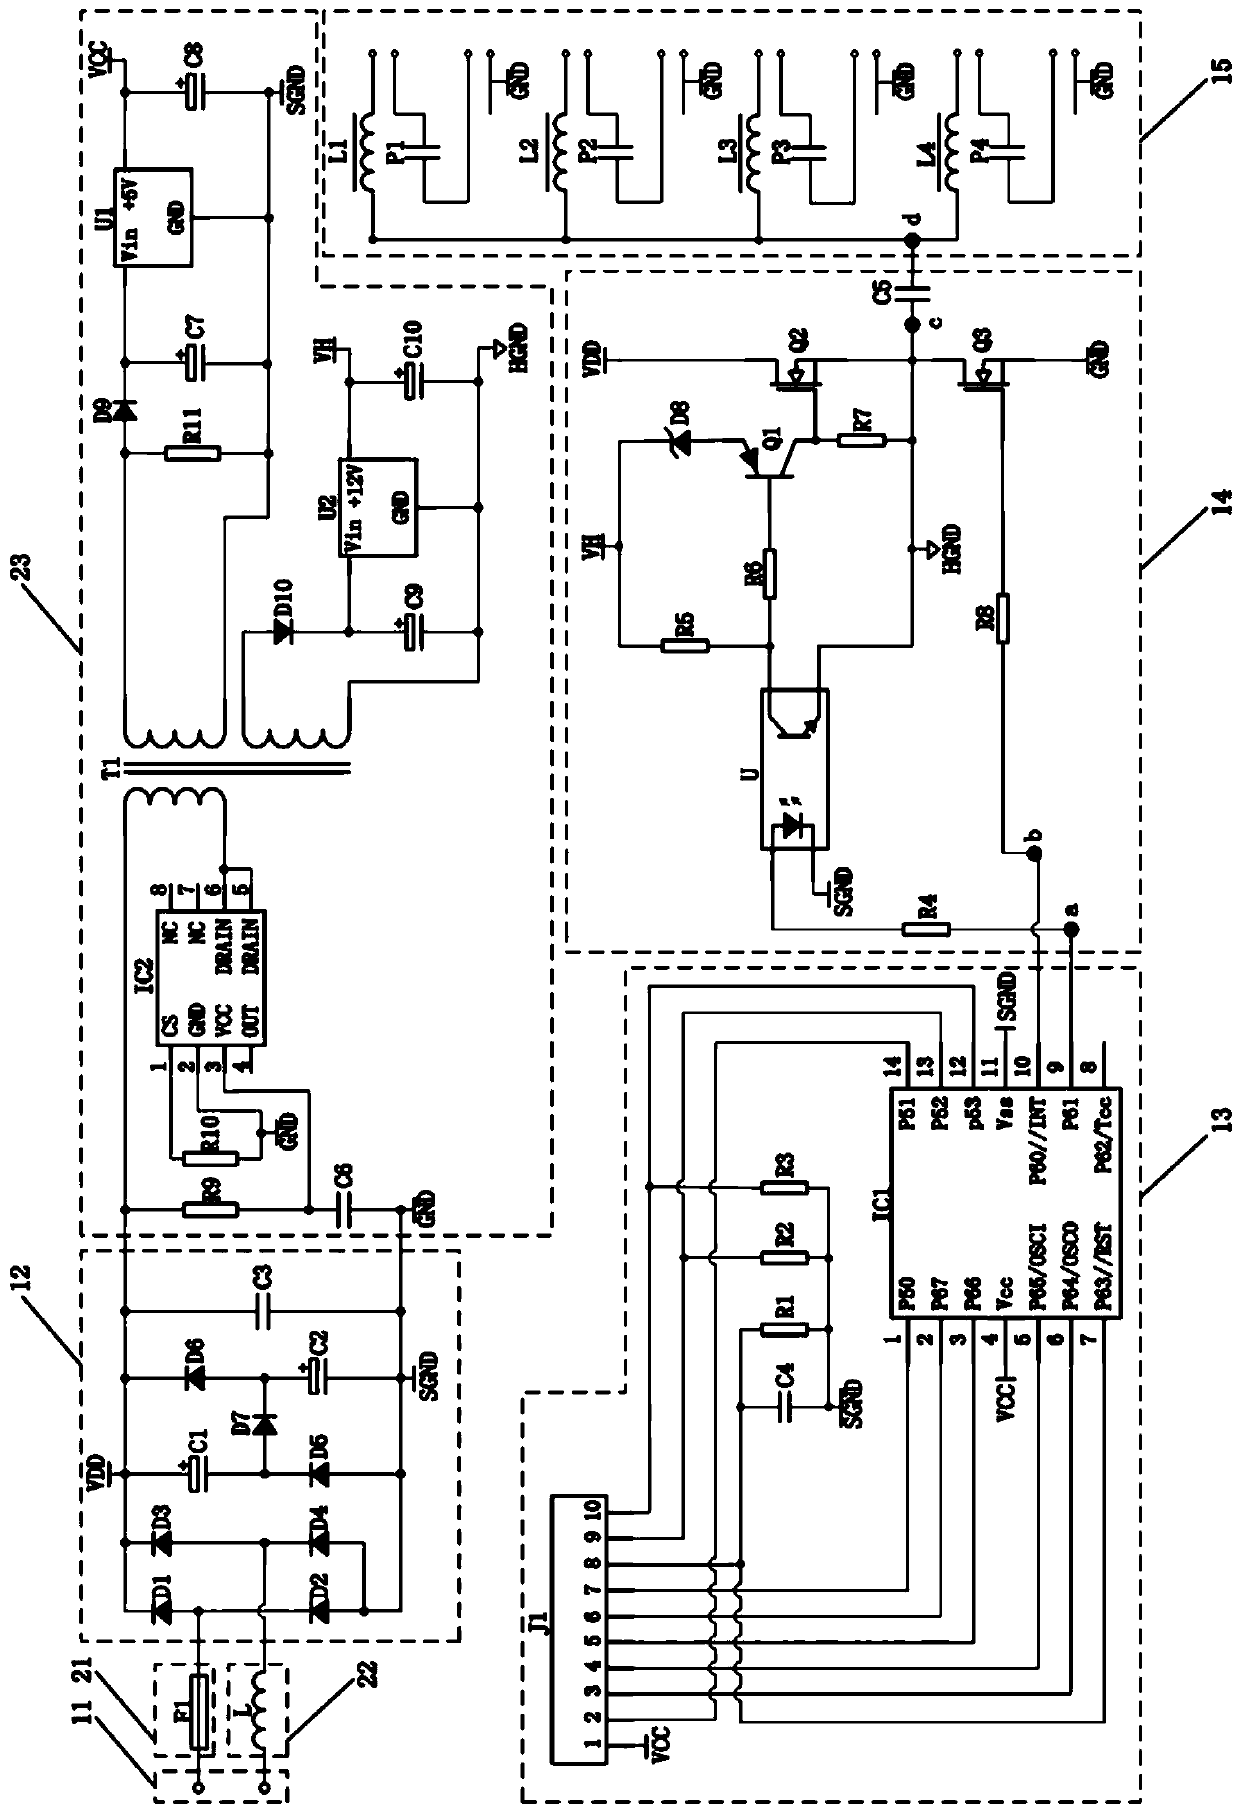 A driving circuit for lamp power control